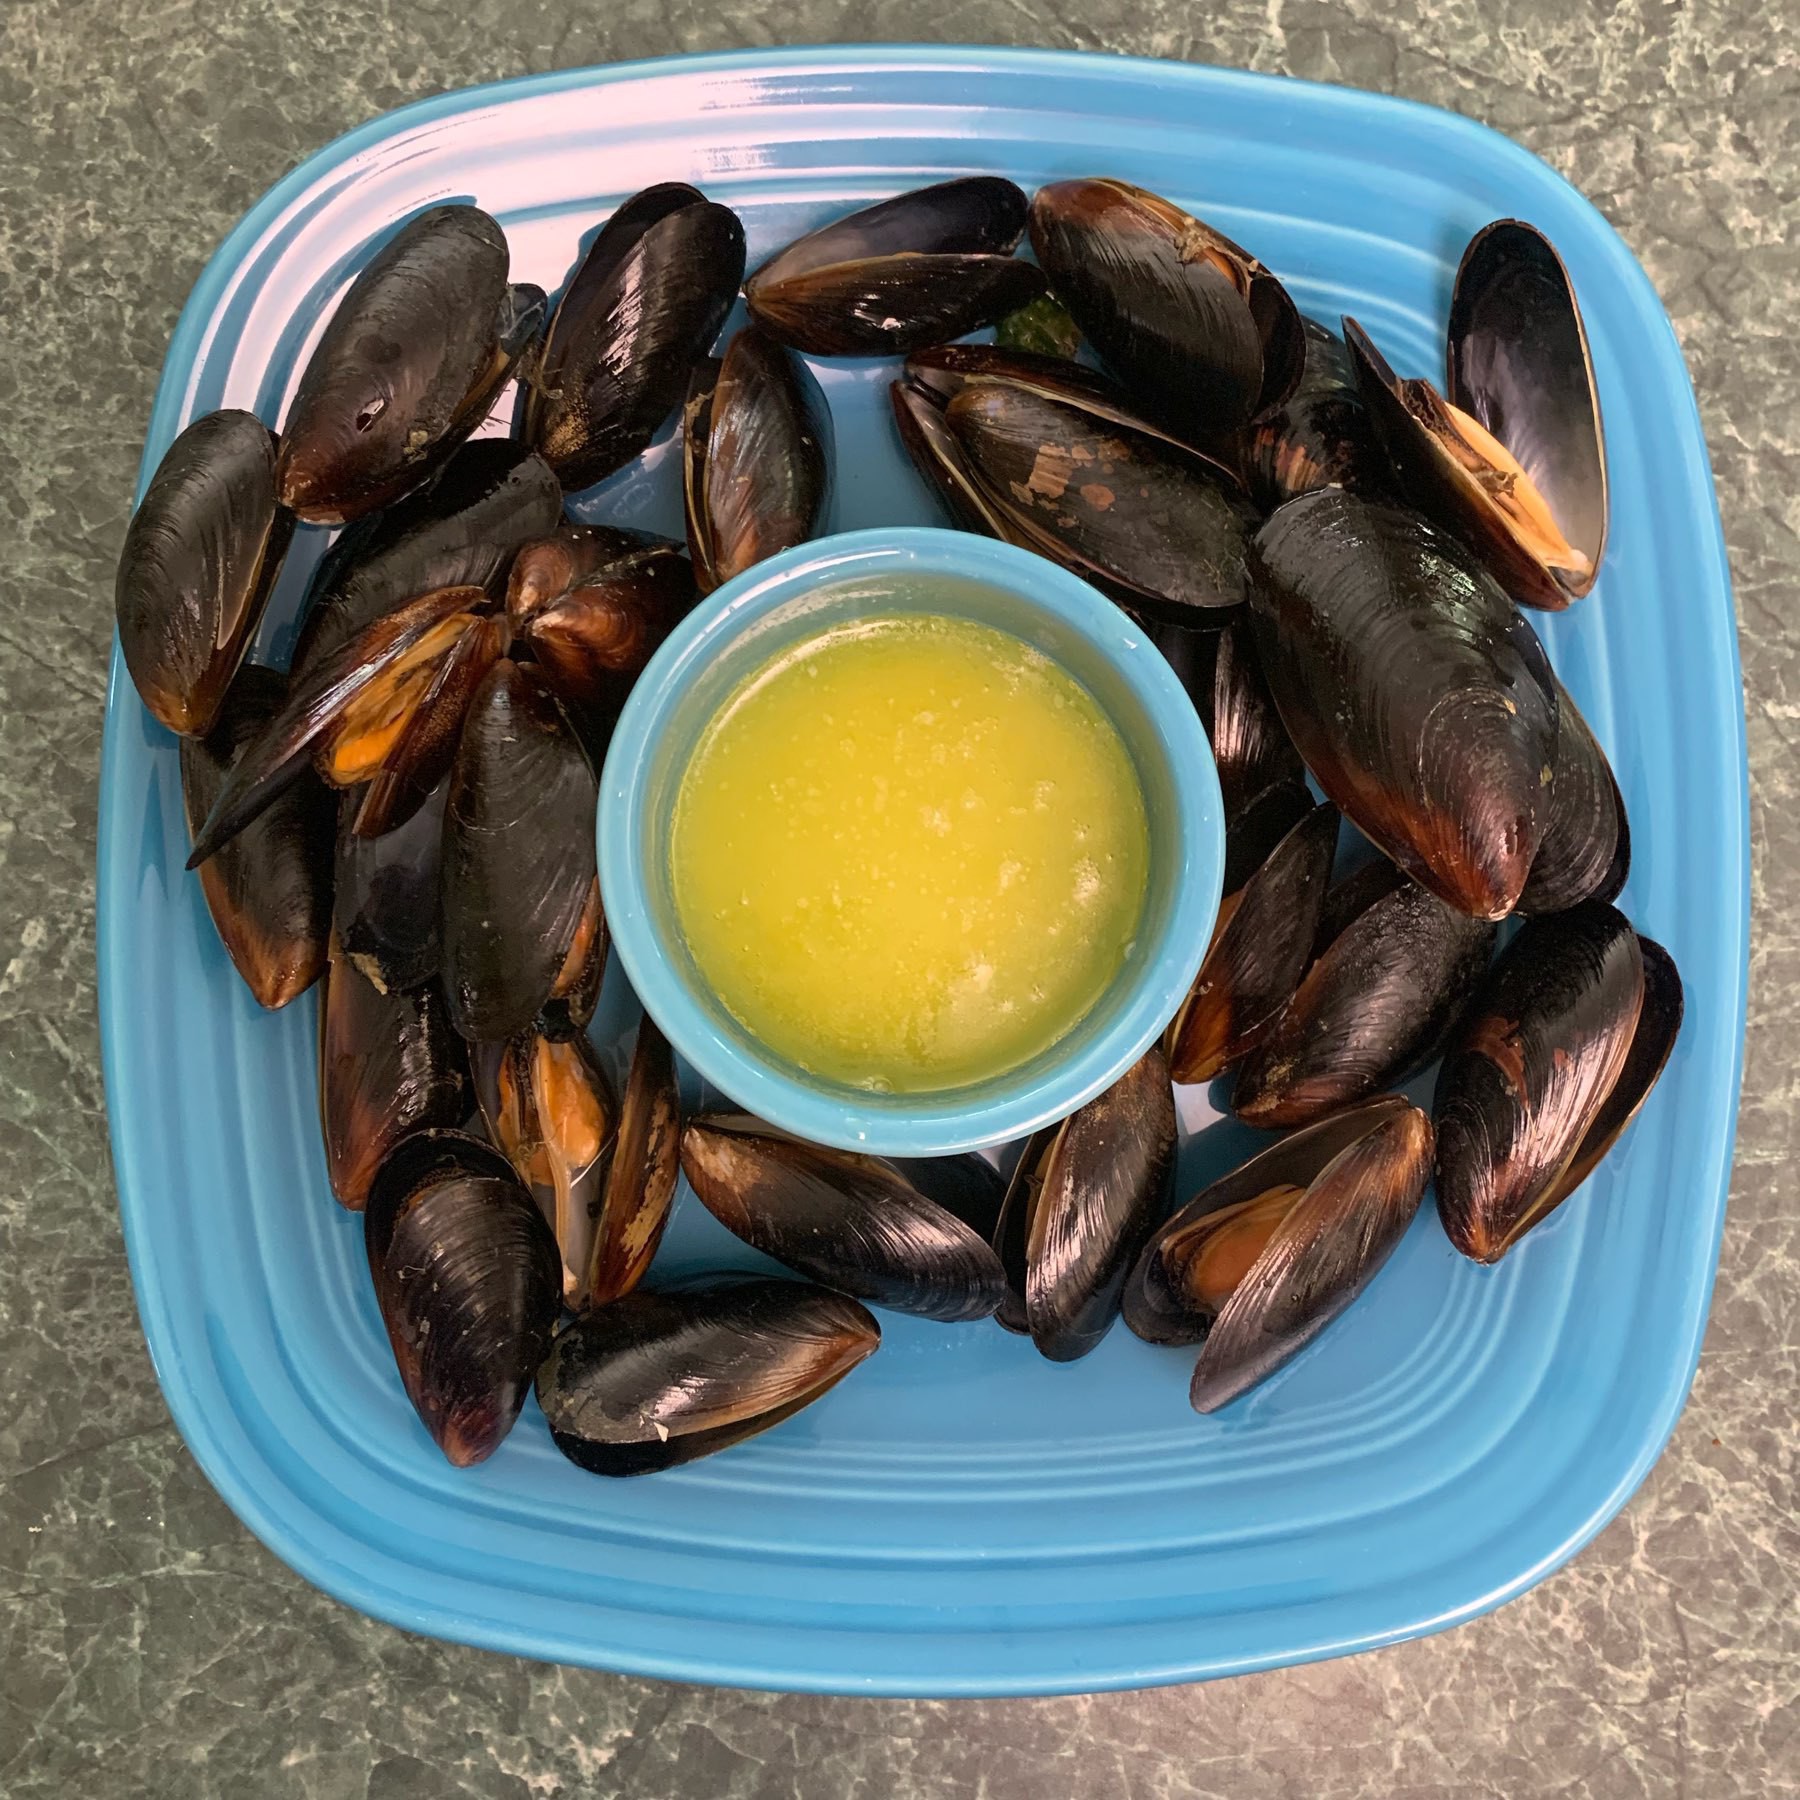 Freshly cooked mussels on a plate surrounding a bowl of melted butter